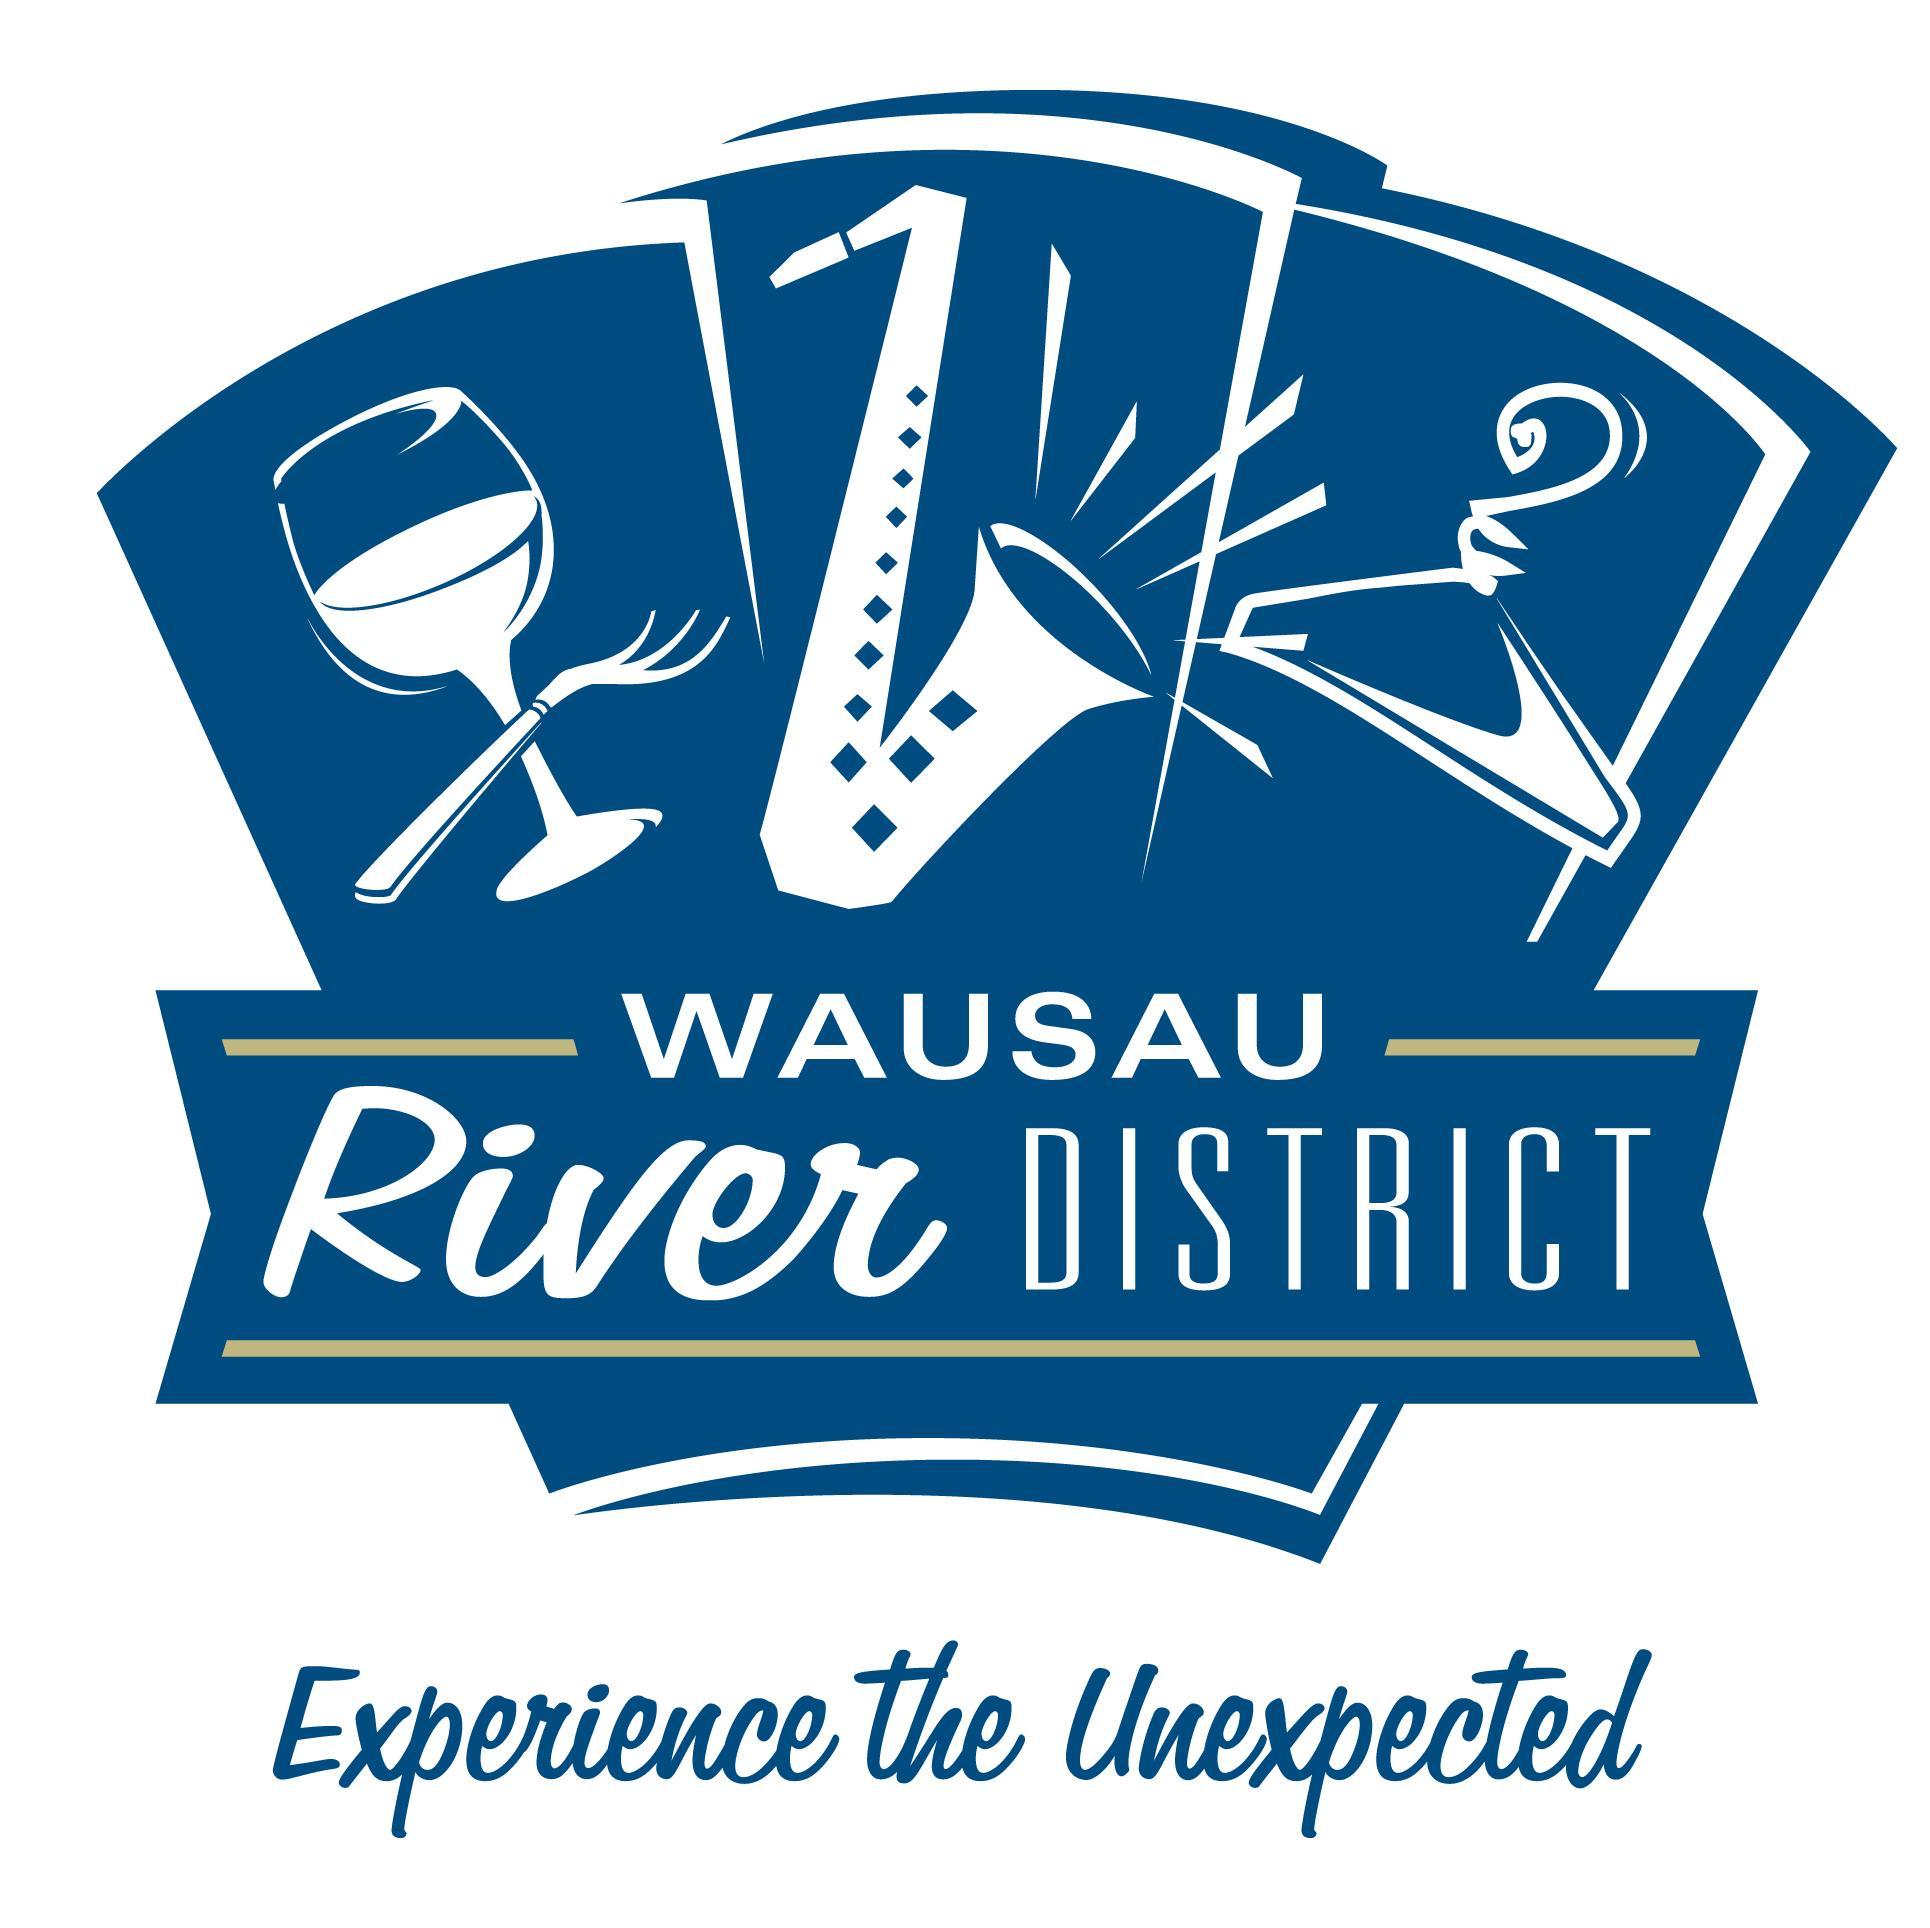 Follow us for the scoop on what's up in downtown Wausau's River District!